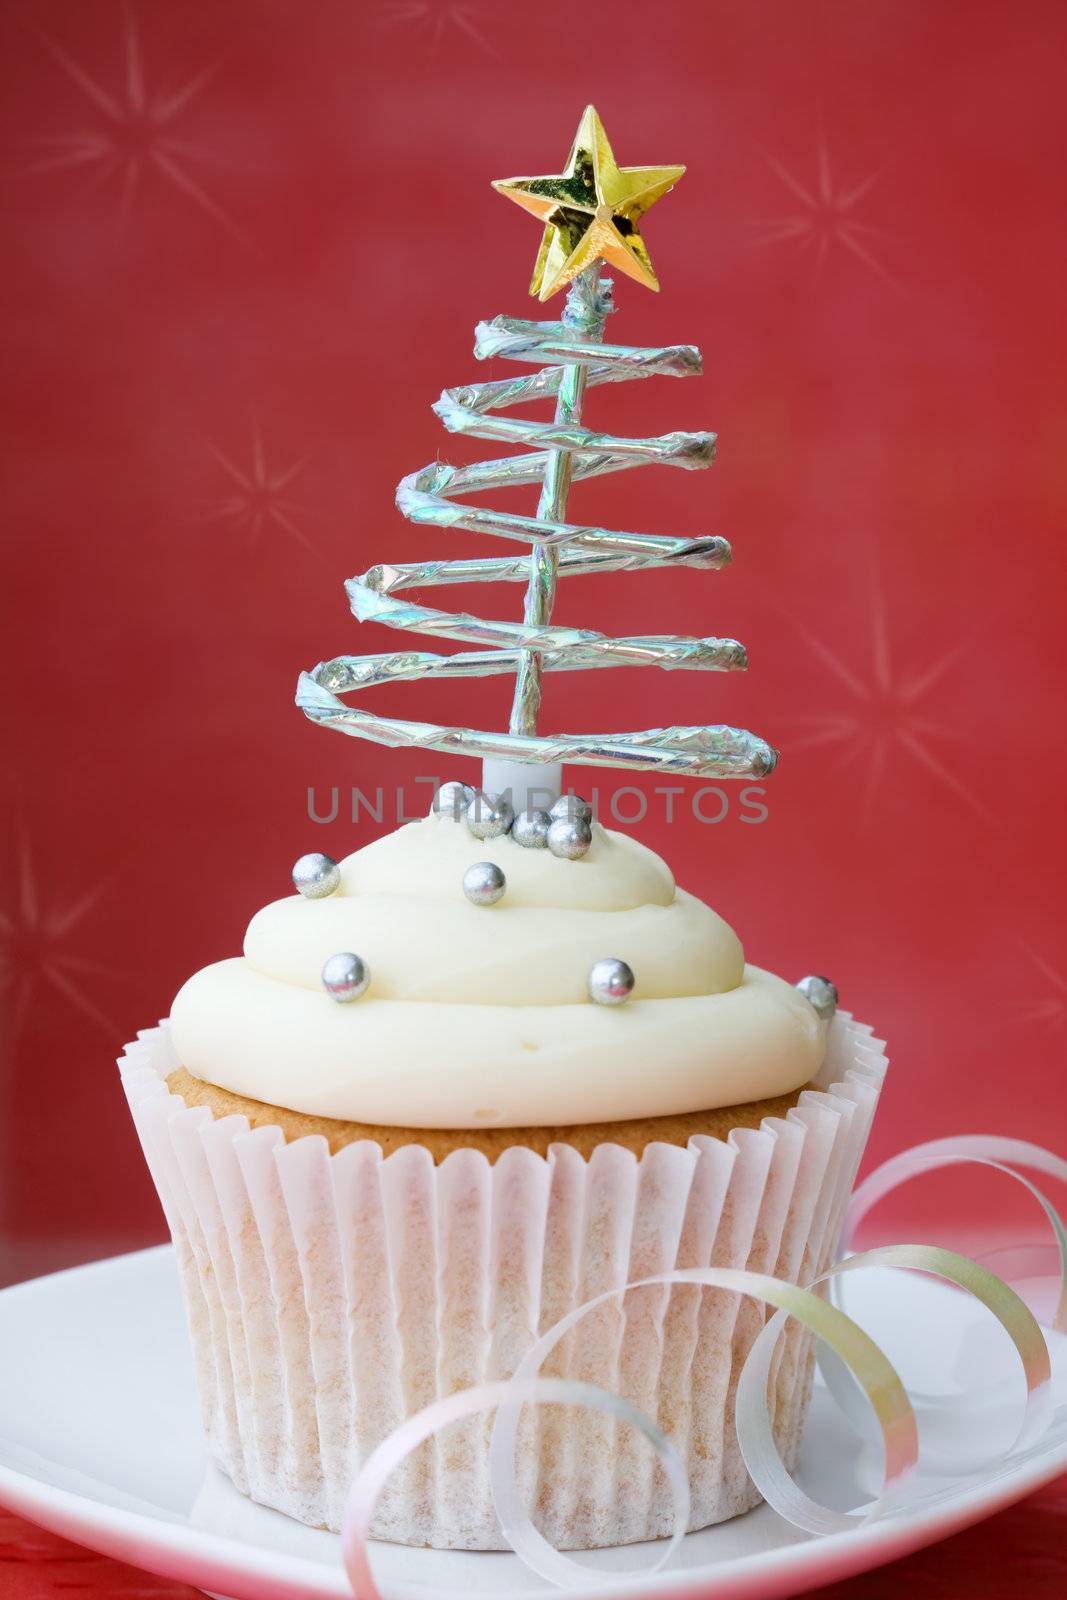 Cupcake decorated with silver dragees and a spiral Christmas tree